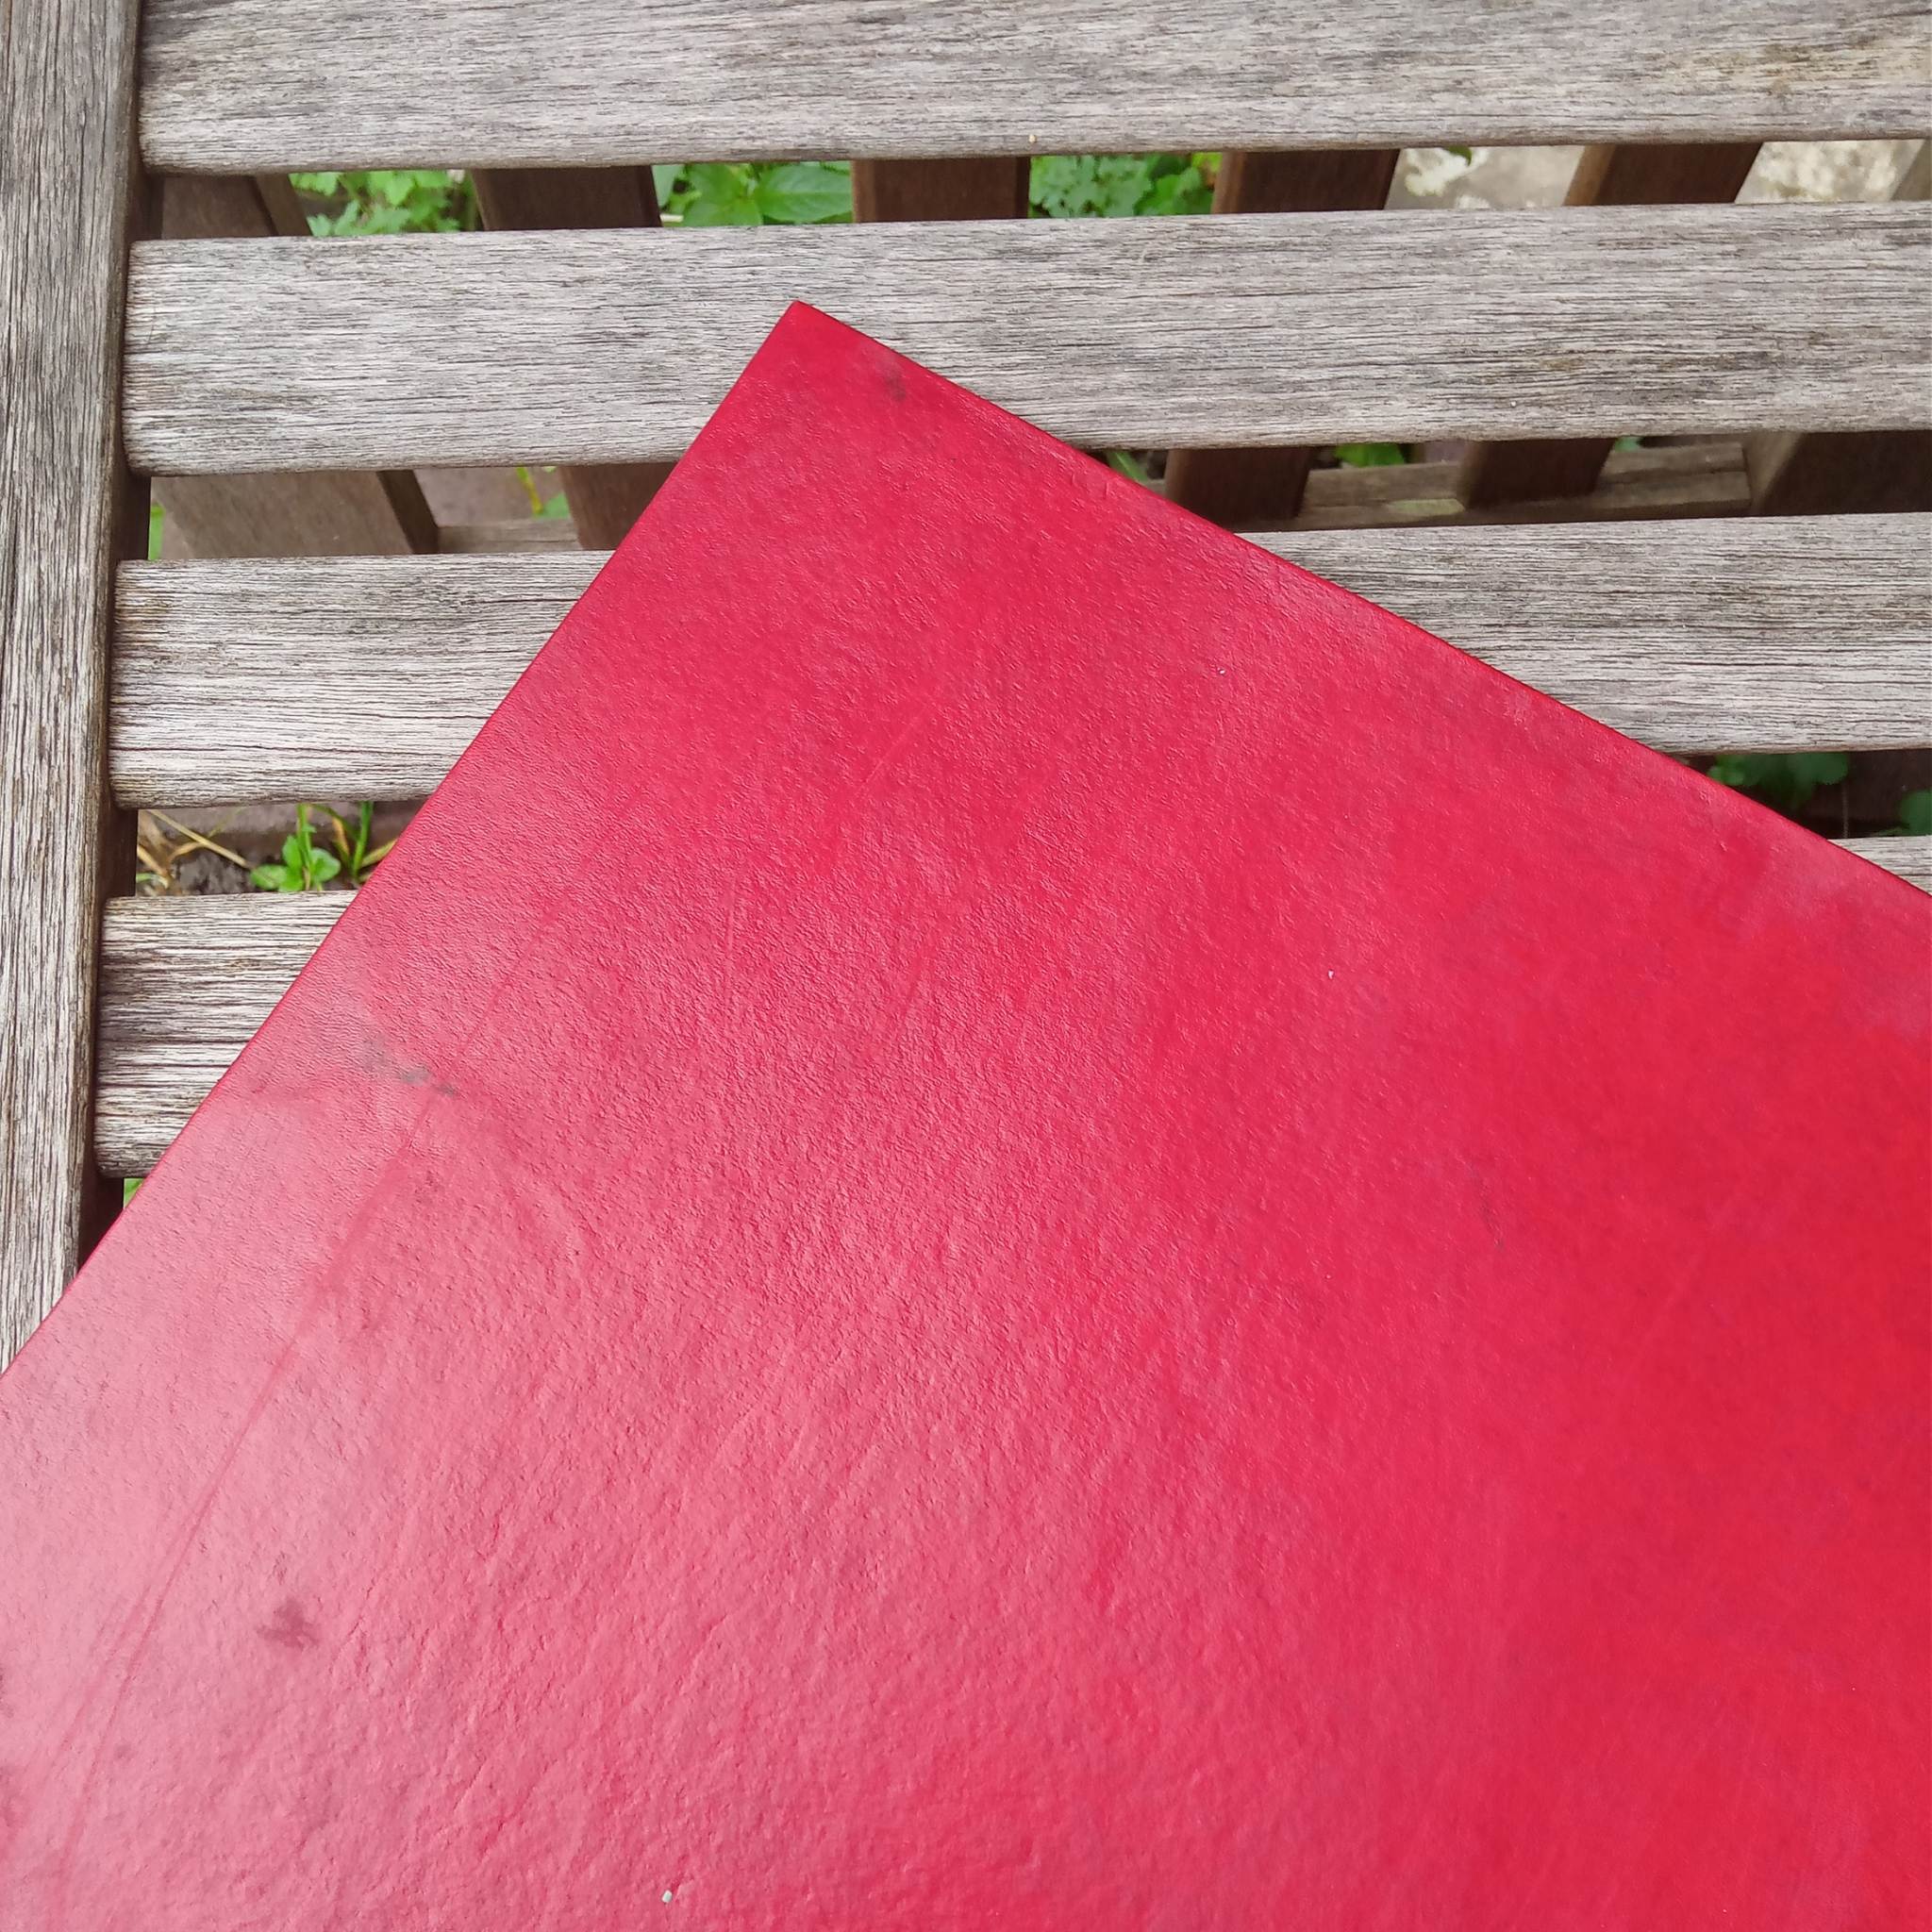 Red A3 leather from our Heritage UK made leather collection ideal for making book covers, pouches, wrist cuffs, sheaths and more